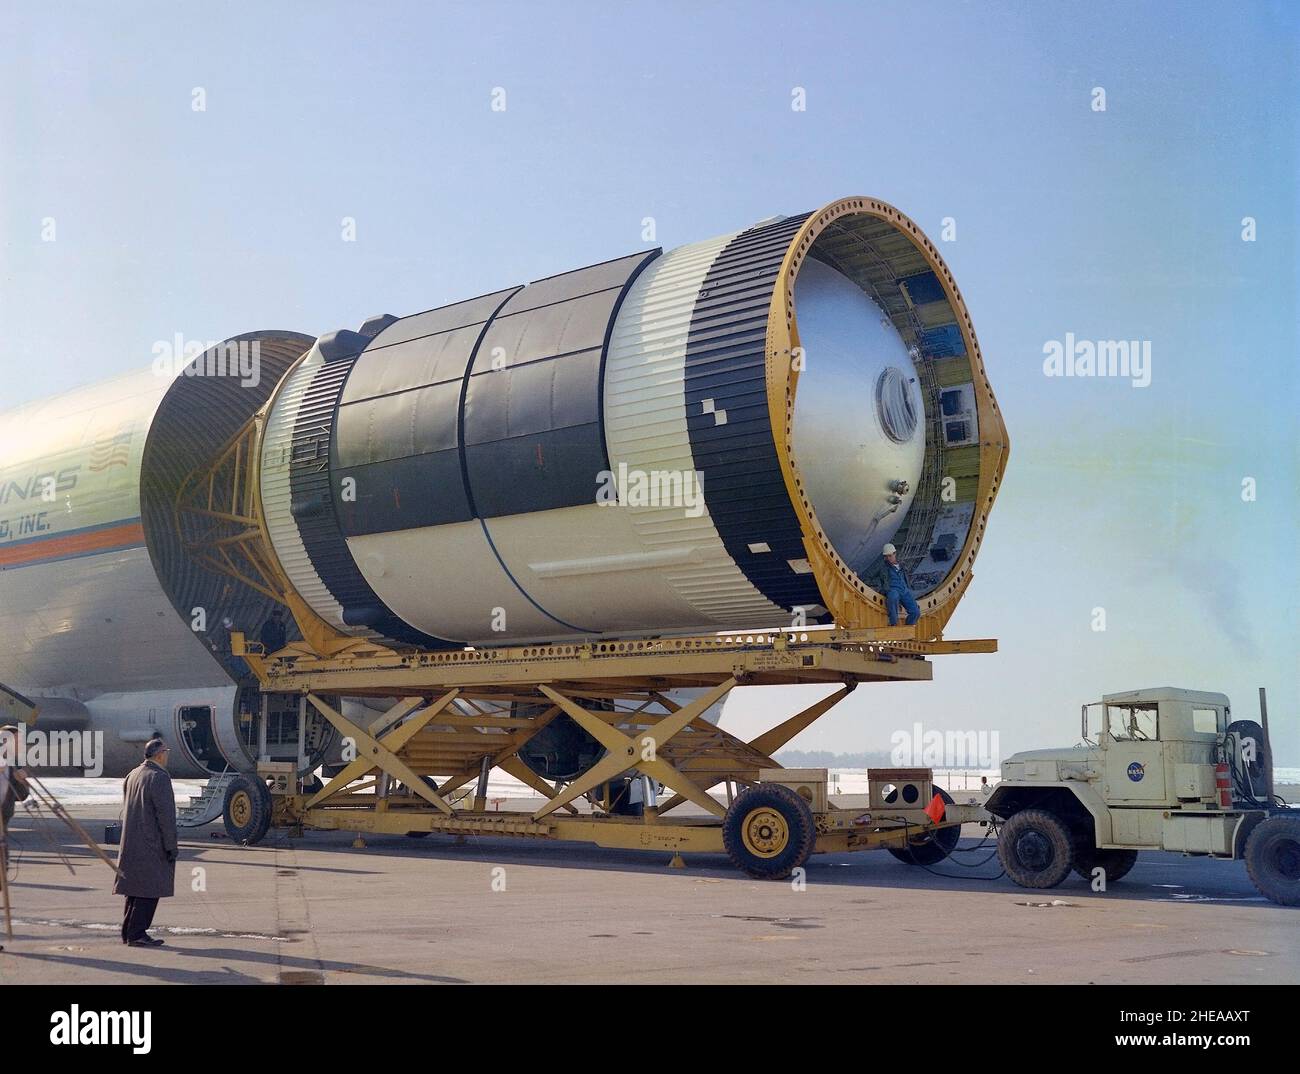 This photograph was taken at the Redstone airfield, Huntsville, Alabama, during the unloading of the Saturn V S-IVB stage that housed the Orbital Workshop (OWS) from the Super Guppy, the NASA plane that was specially built to carry oversized cargo. The OWS measured 22 feet (6.7 m) in diameter, and 48 feet (14.6 m) in length. The Saturn V S-IVB stage was modified at the McDornell Douglas facility at Huntington Beach, California, for a new role, which was to house the OWS. In addition to the test articles, engineering mockups, and flight equipment, both McDonnell Douglas and Martin Marietta buil Stock Photo